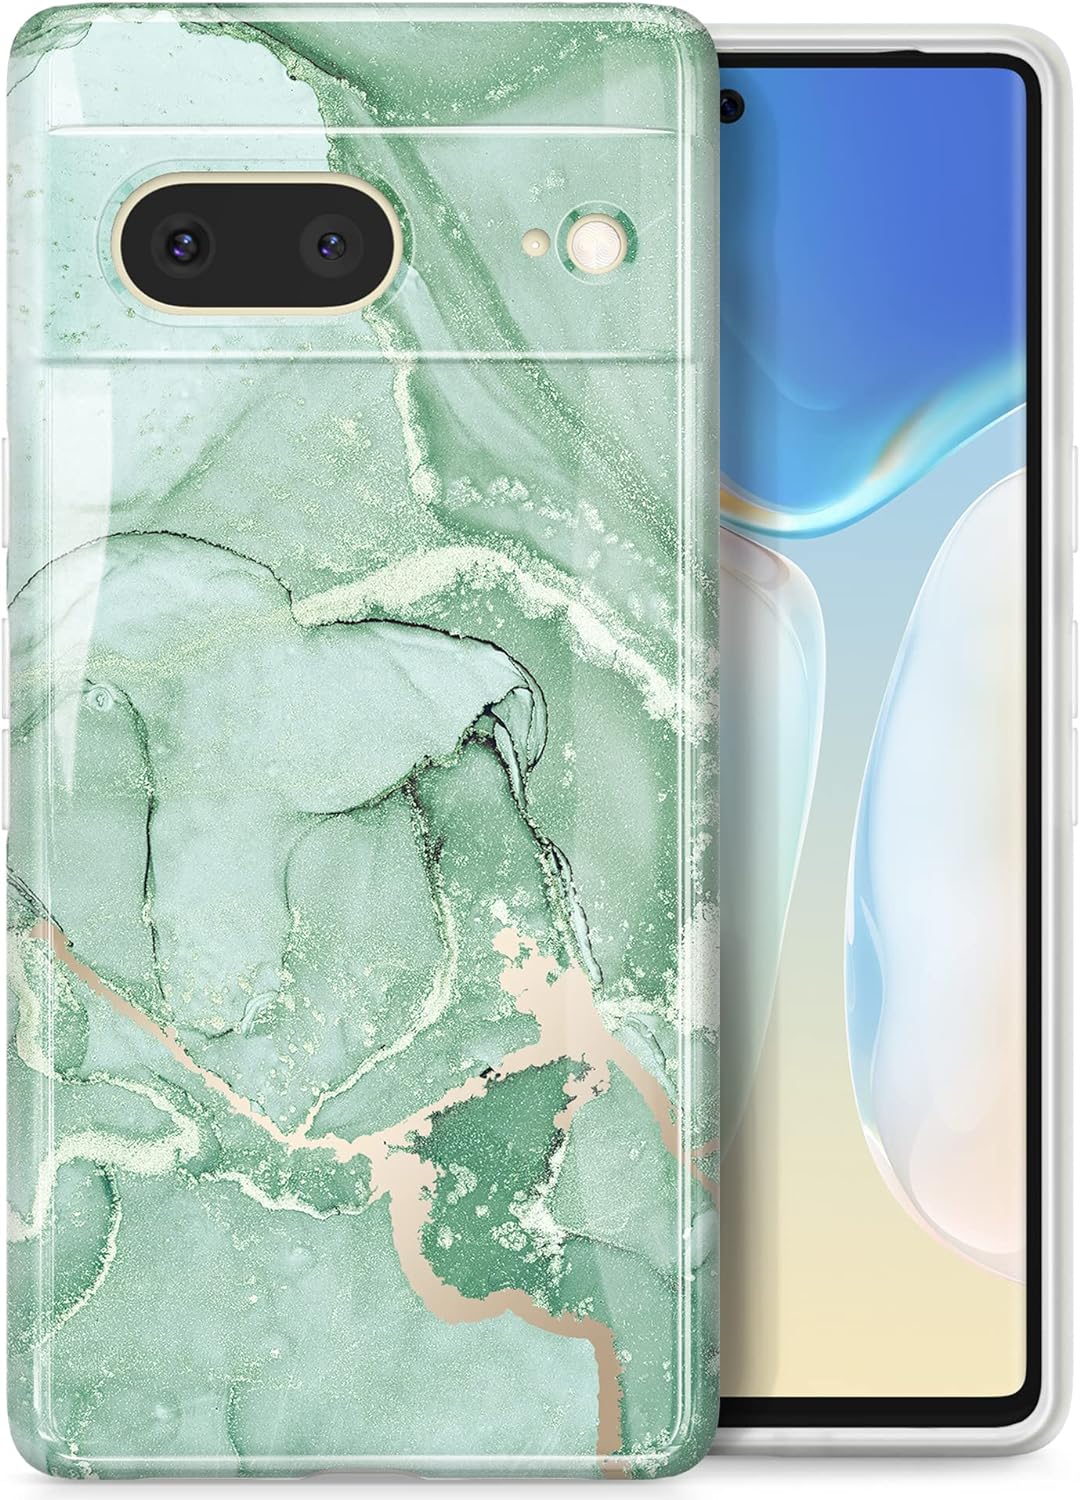 GVIEWIN Case Compatible with Google Pixel 7 Case 6.3 Inch, [10FT Military Grade Protection] Stylish Marble Cases Shockproof Slim Thin Flexible TPU Phone Cover for Women 2022 (Bamboo Green)